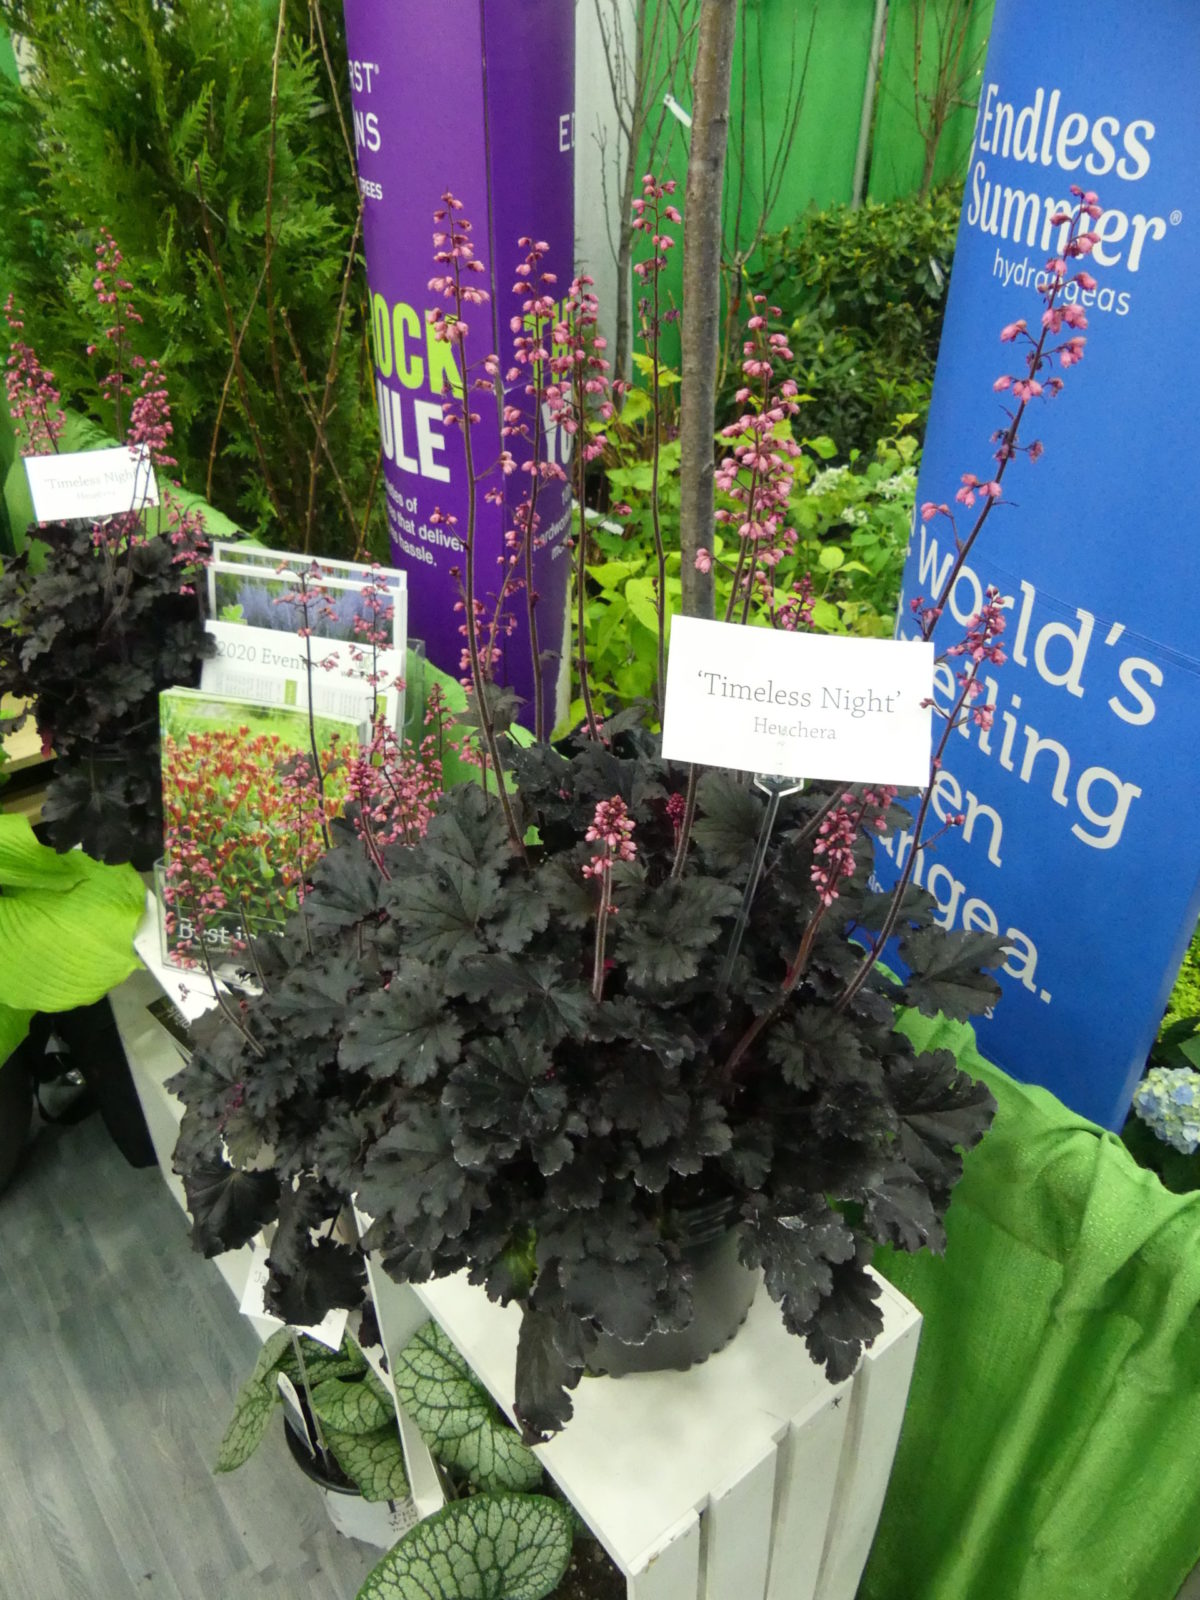 Heuchera Timeless Night was introduced by Walters Gardens last year and will show up in garden centers this year. It has dark foliage that's almost black with medium pink flowers. It will perform similarly to other Heucheras in the 